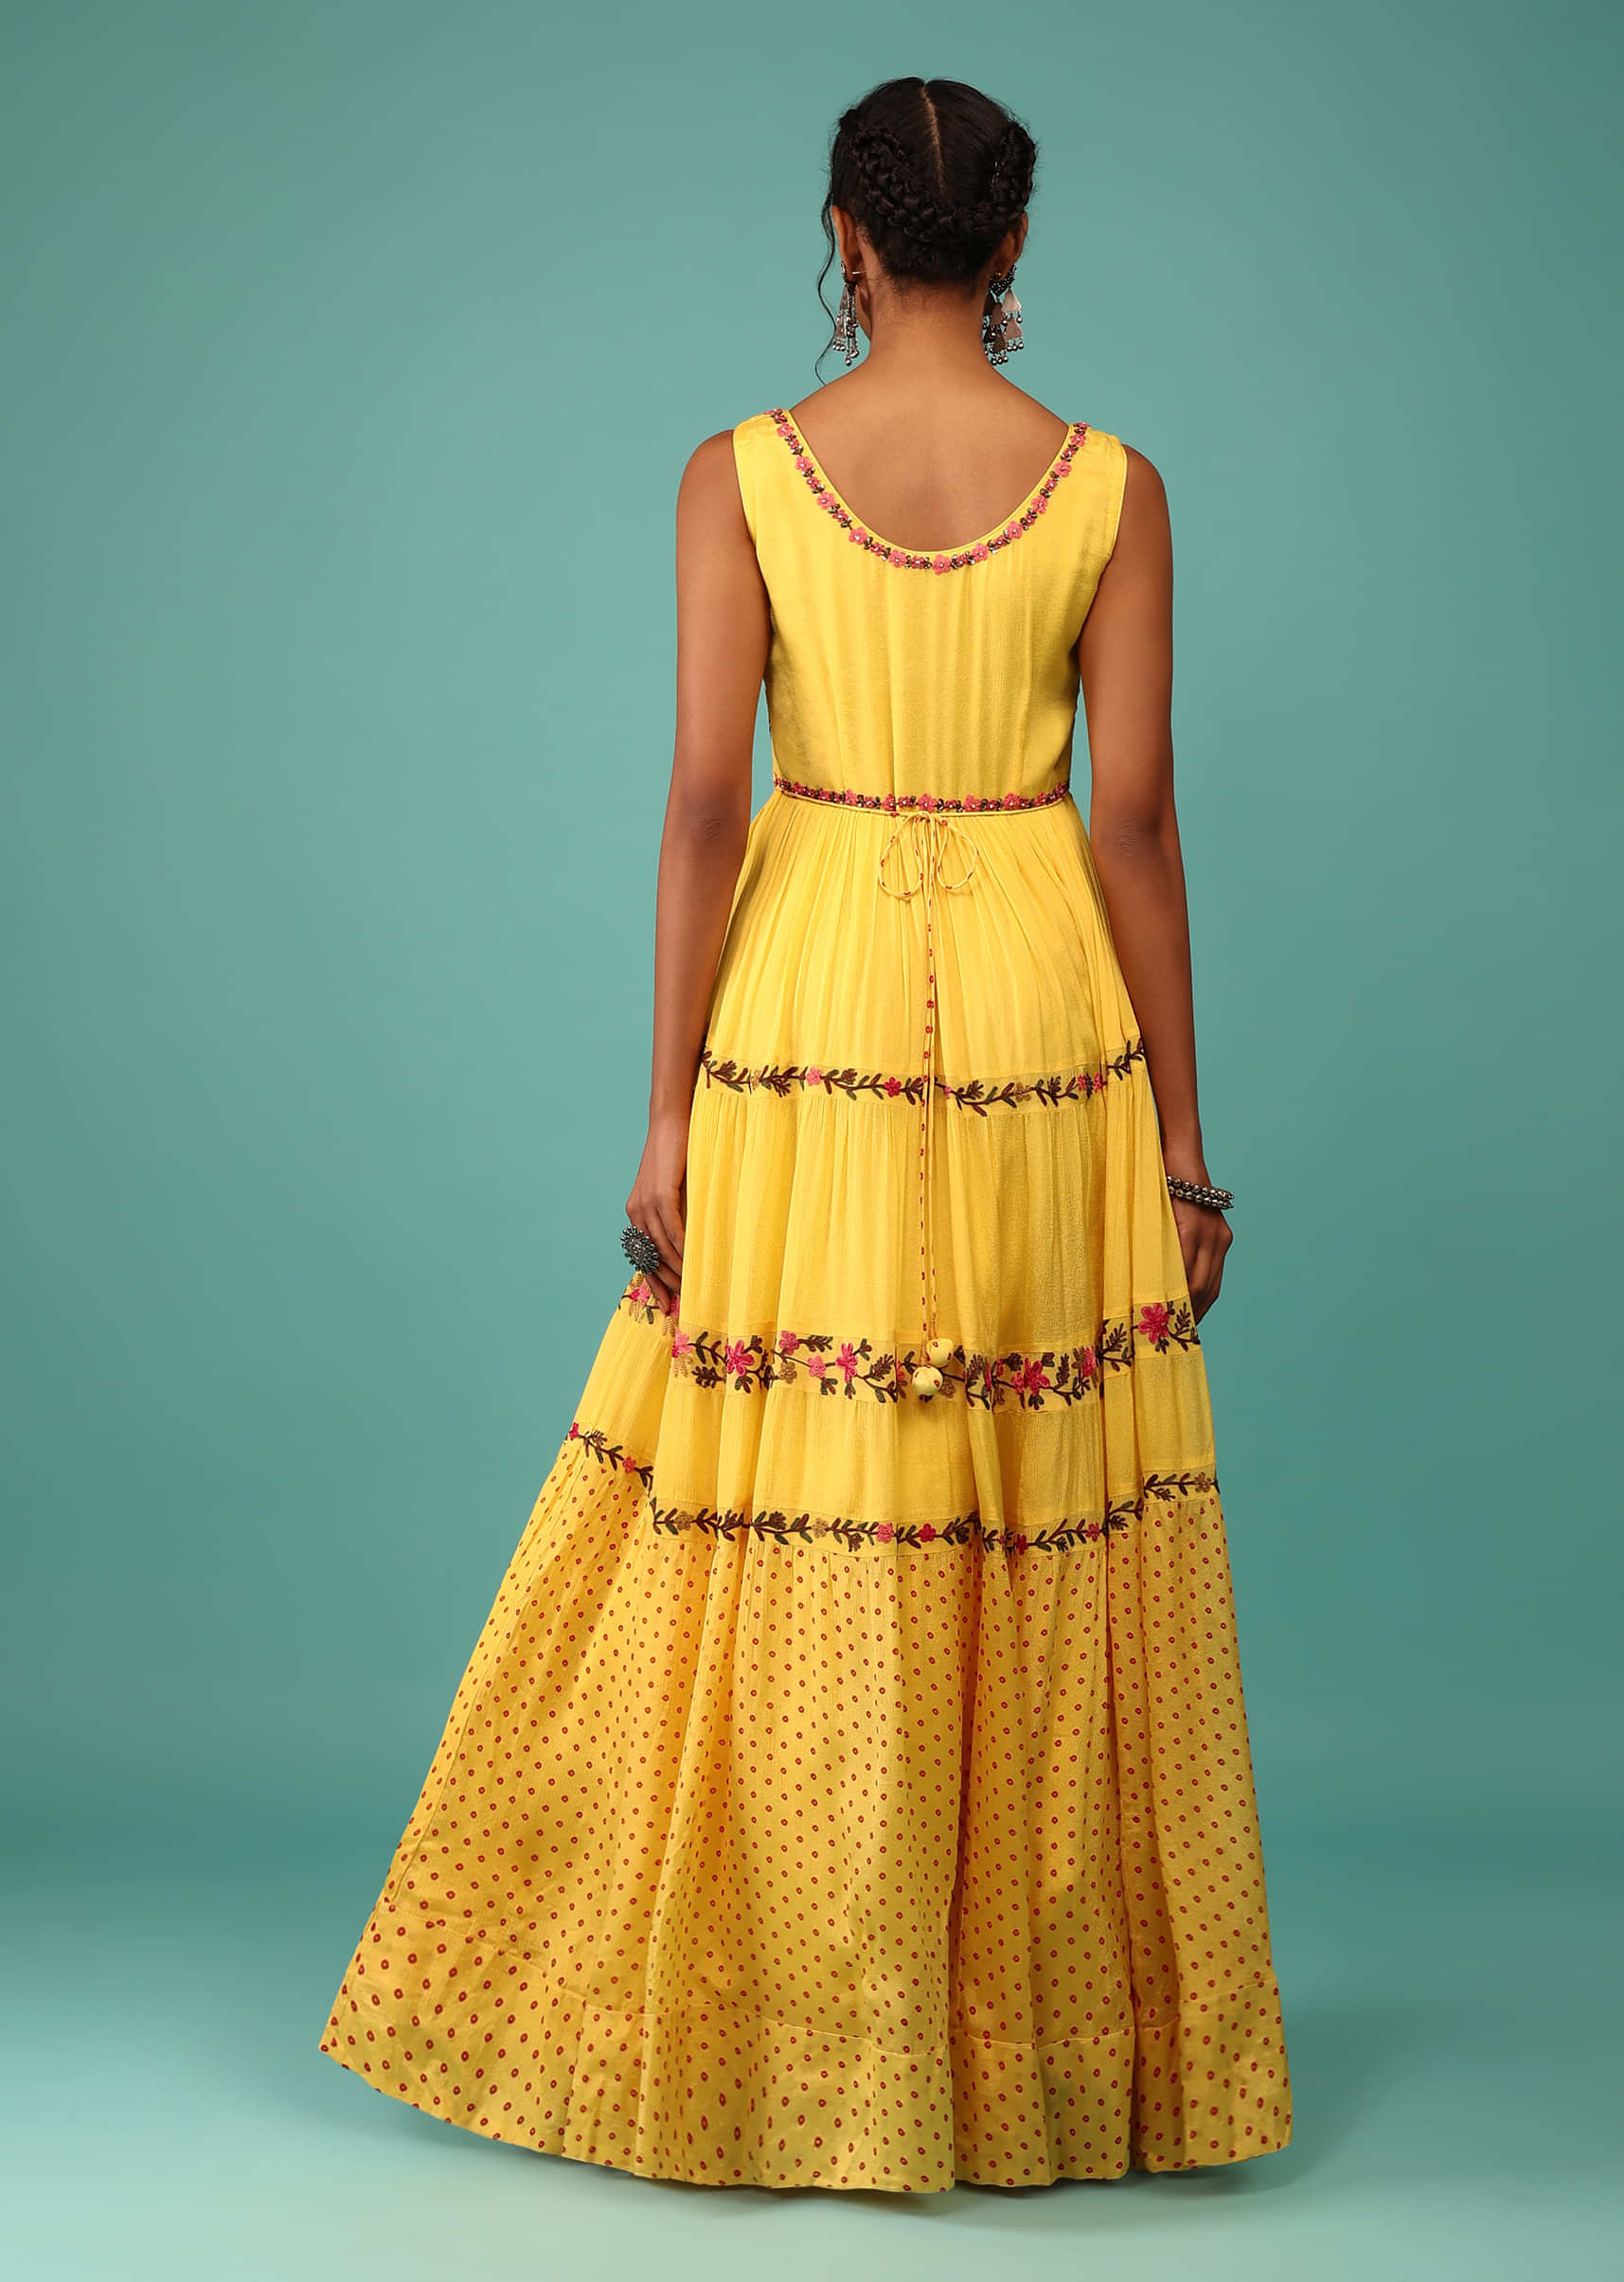 Canary Yellow Flowy Dress In Chiffon With Floral Kashmiri Thread Work And Embroidery